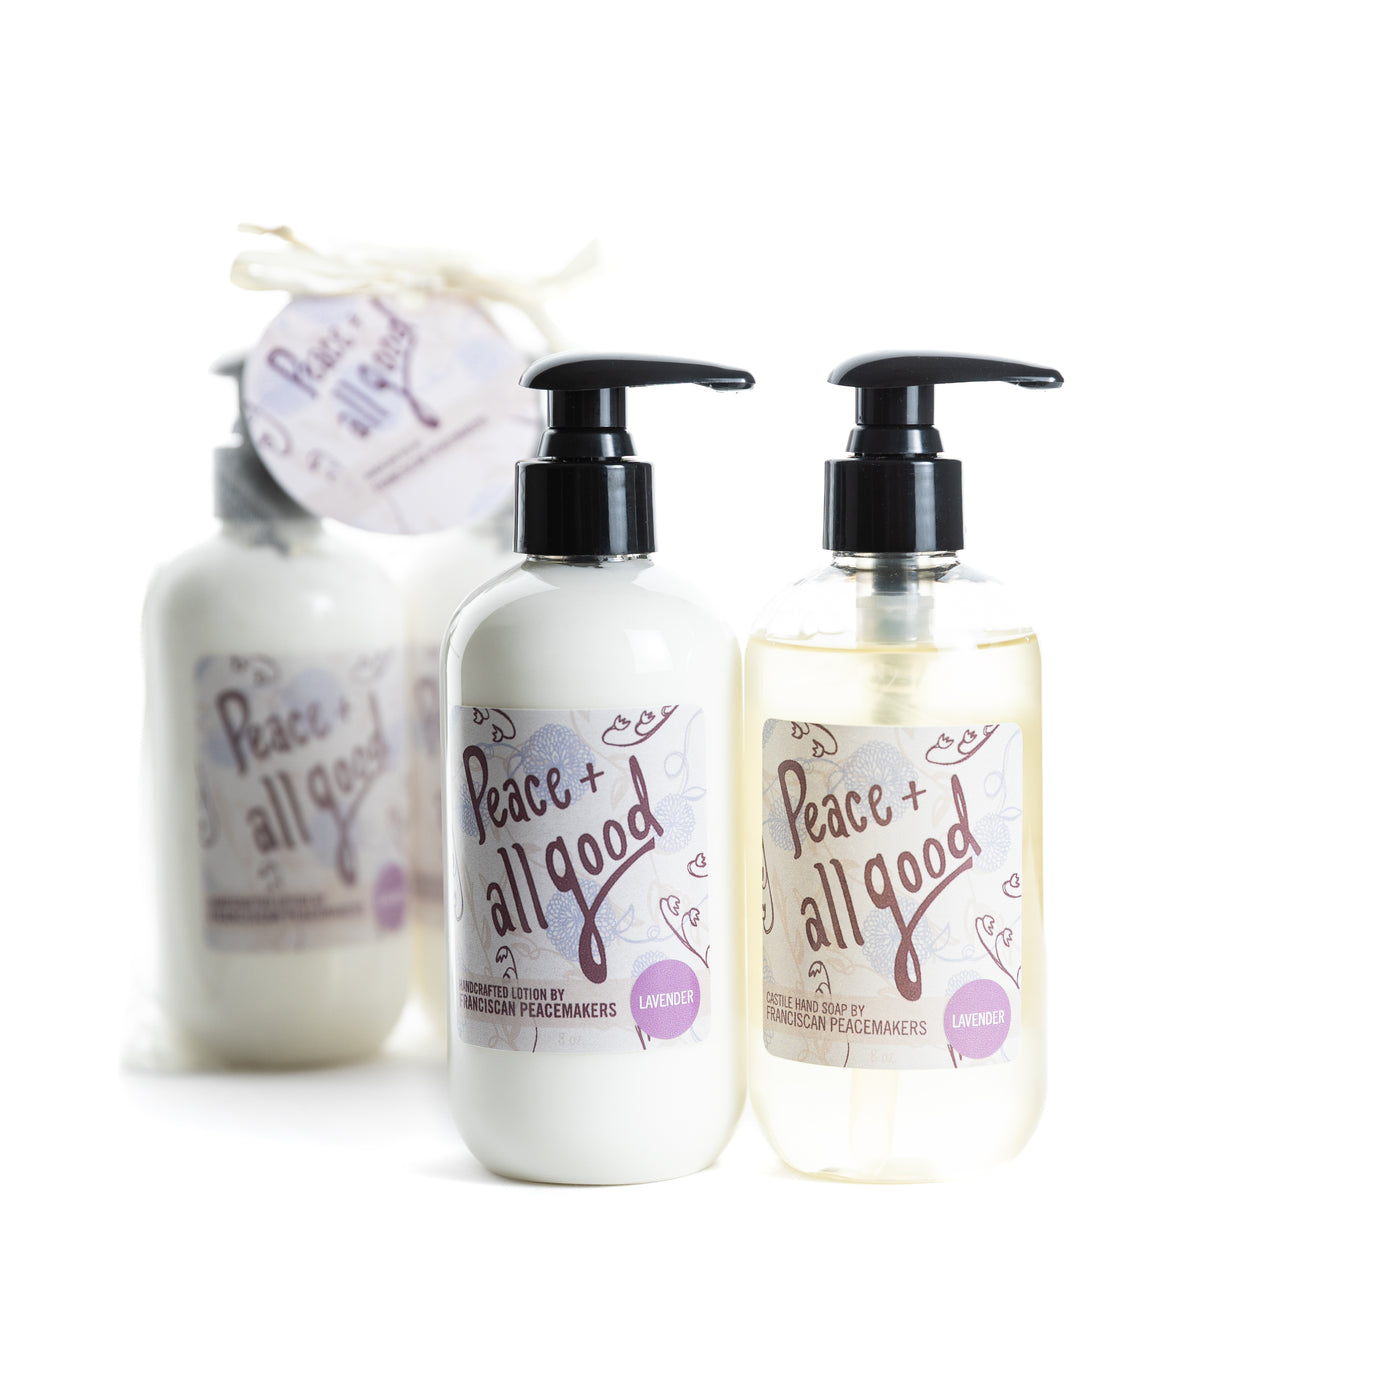 Castile Soap & Hand Lotion Duo Package